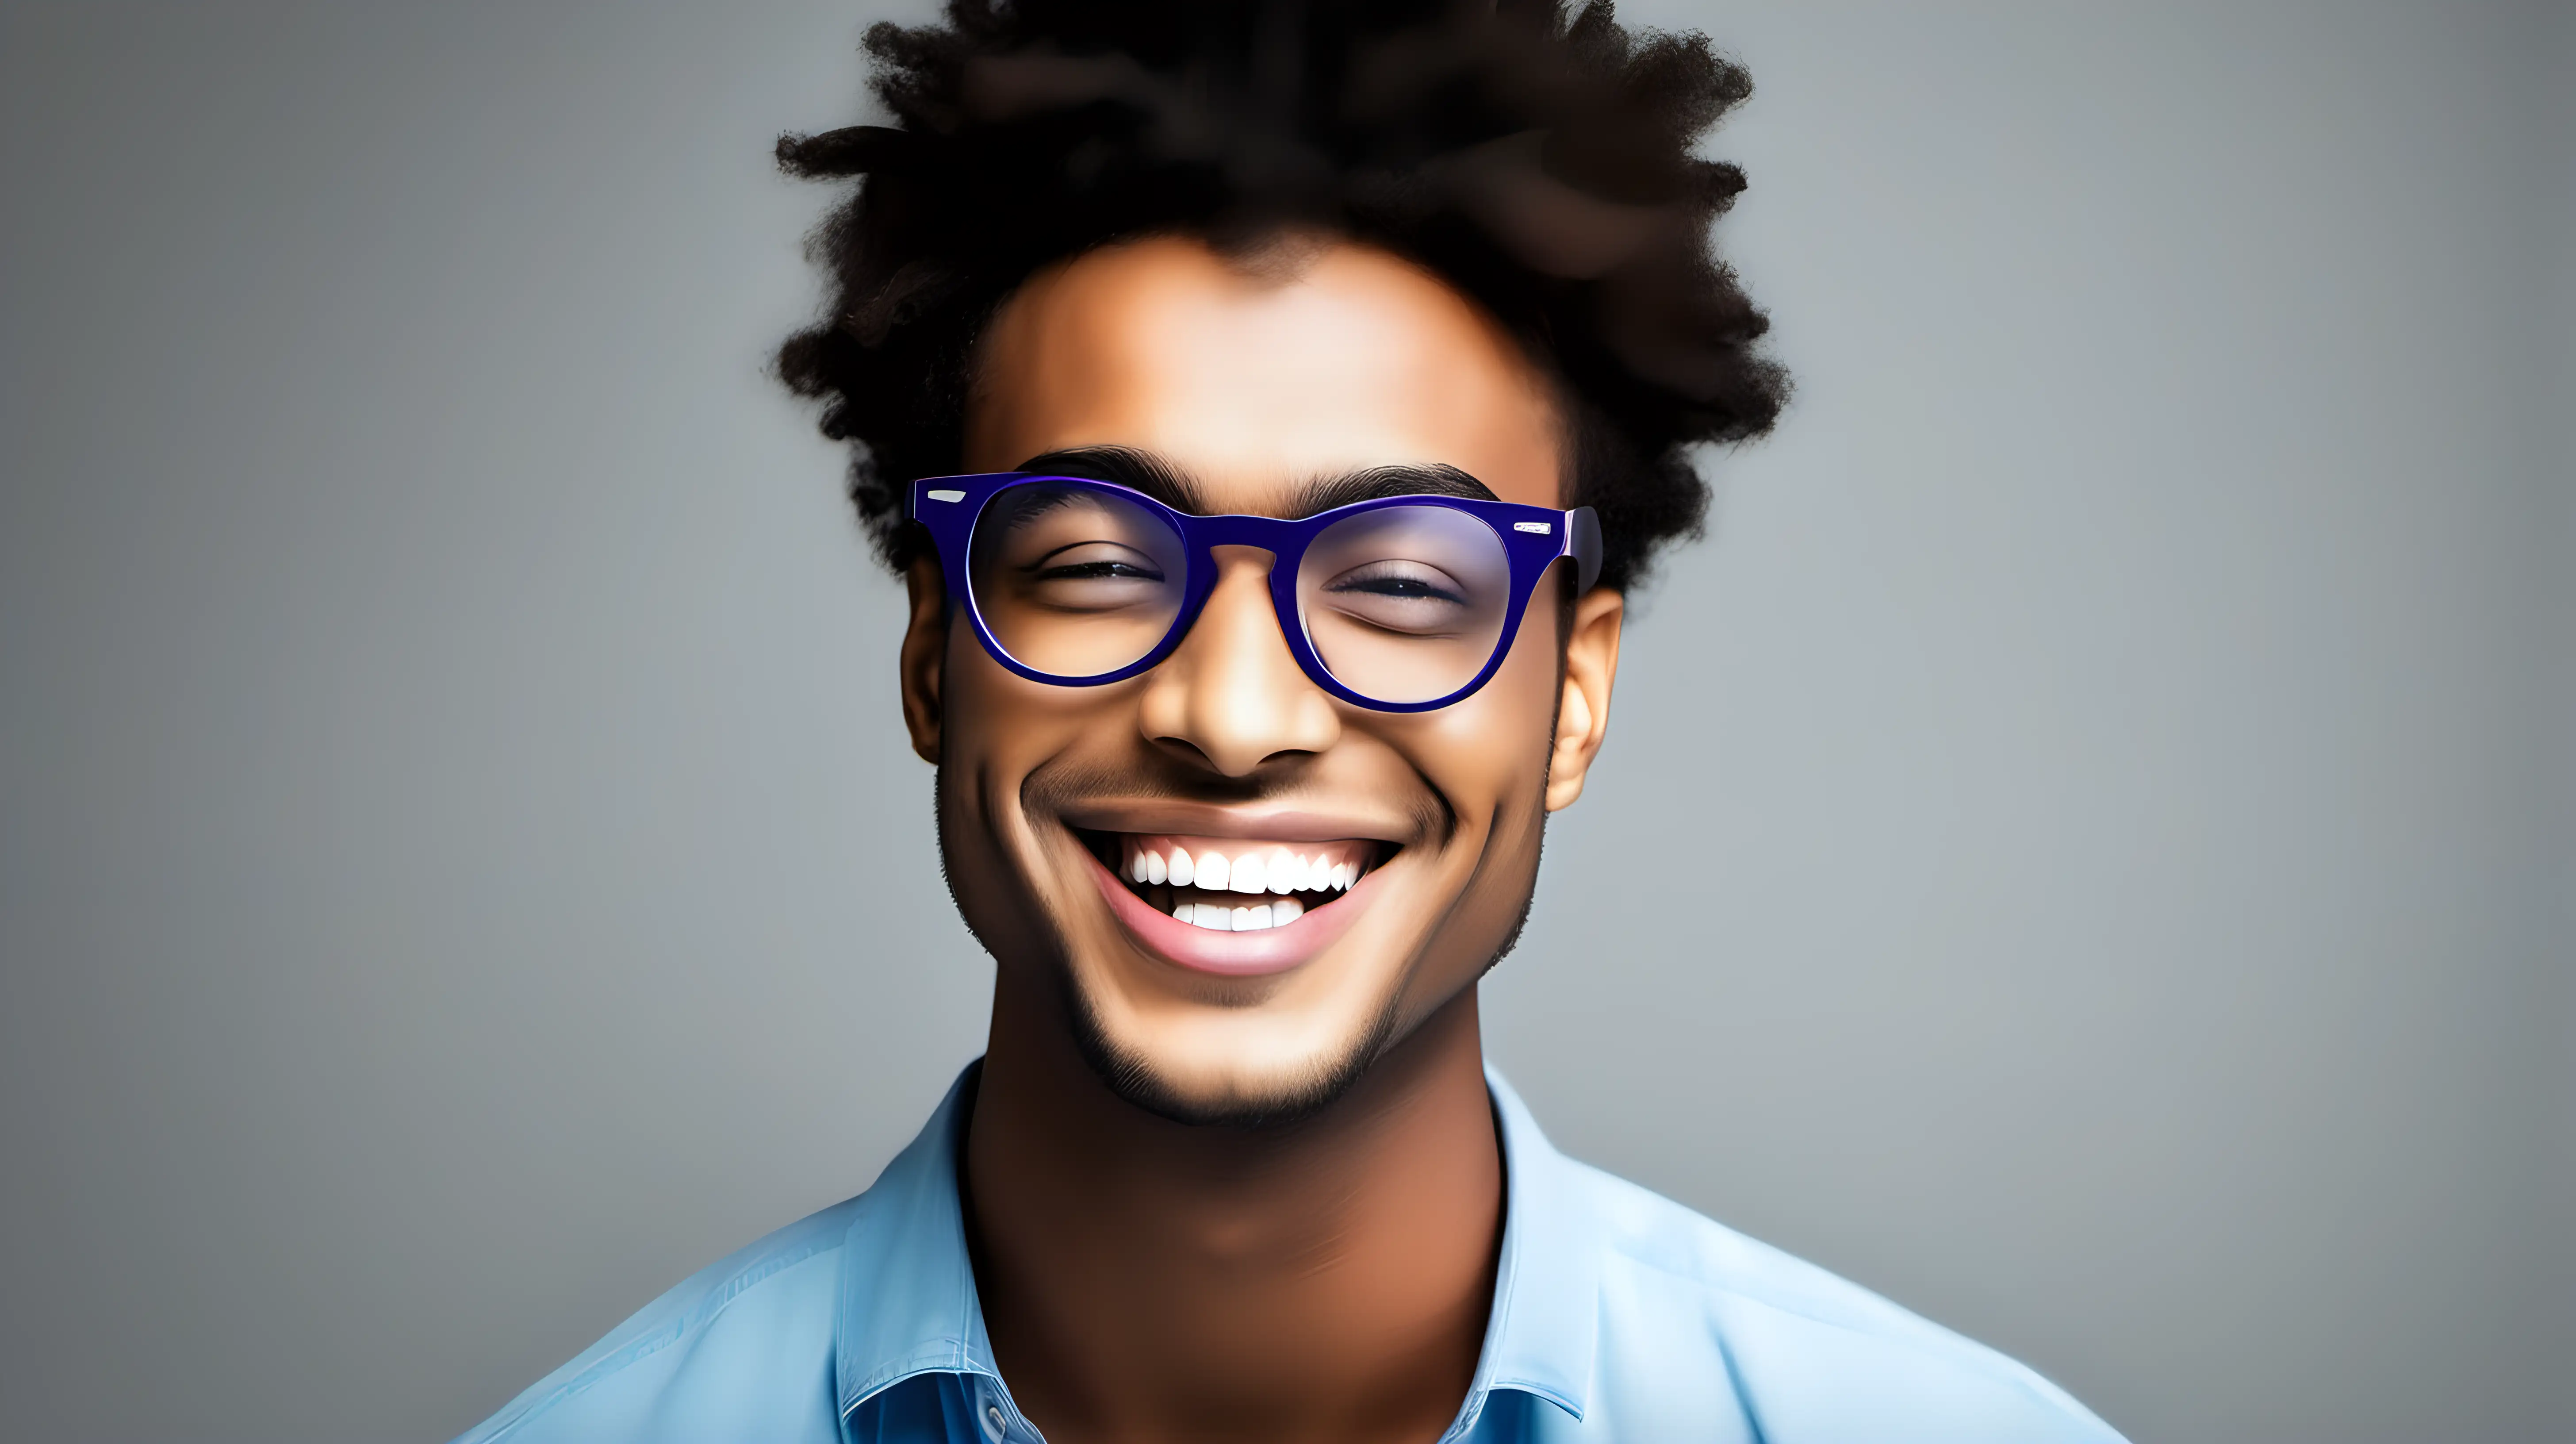     Showcase a vibrant and youthful face wearing trendy glasses, against a clean background, radiating energy and positivity.